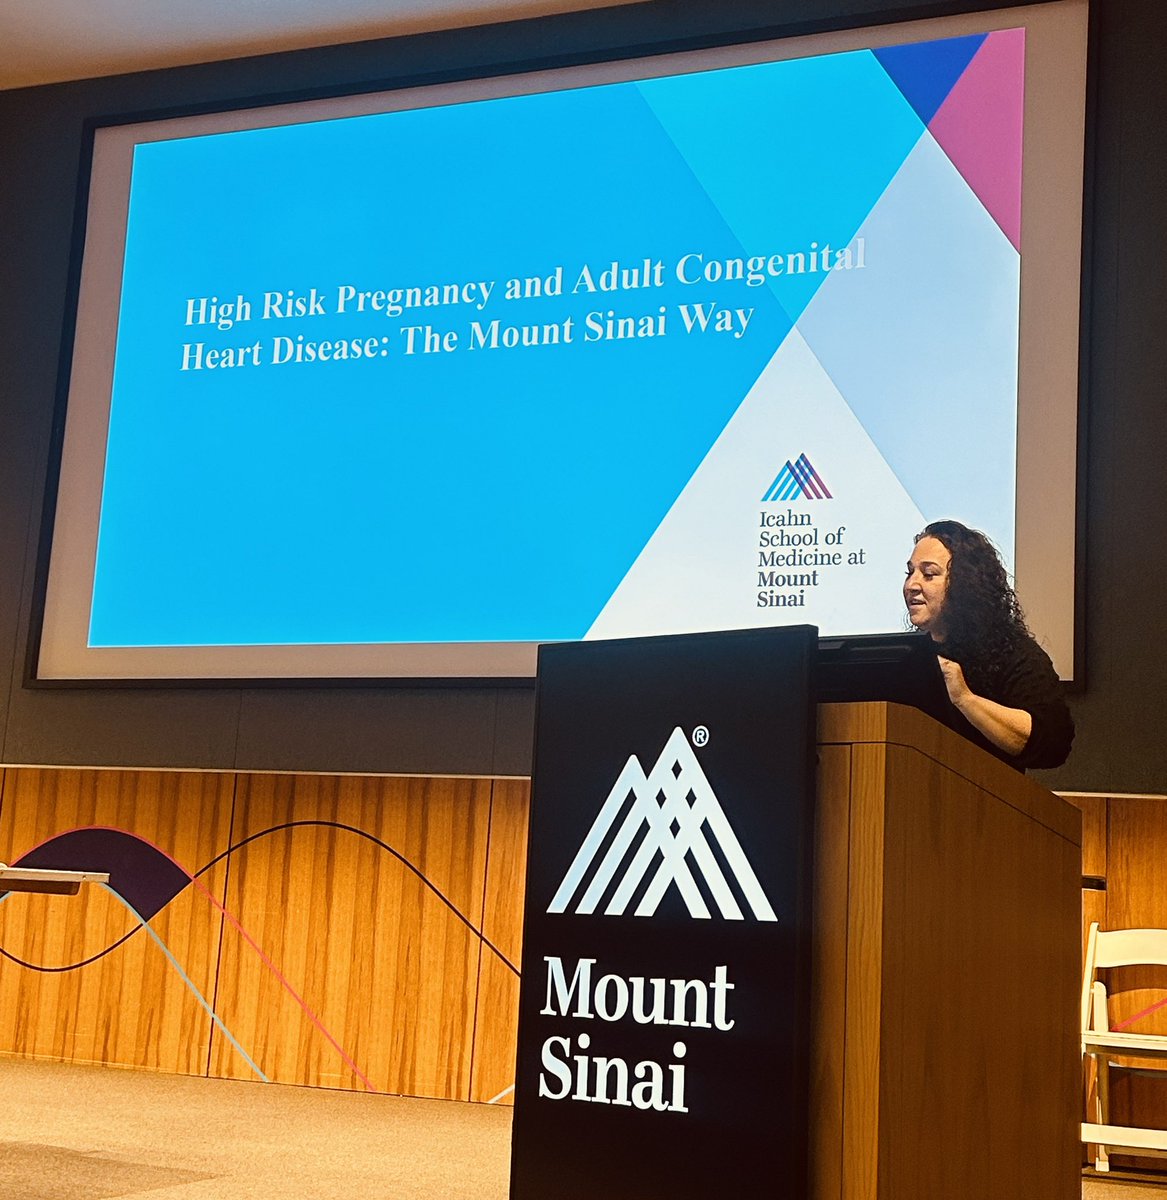 Dr Lauren Ferrara @MountSinaiNYC discussing the 5yr mark for the multidisciplinary #ACHD #MFM clinic with outstanding outcomes! 🙏🏽to all involved but 🙏🏽mostly to the pts. who trust us with their care. Thank you! #teamwork @MountSinaiHeart @MountSinaiPeds @MySMFM @ACHA_Heart